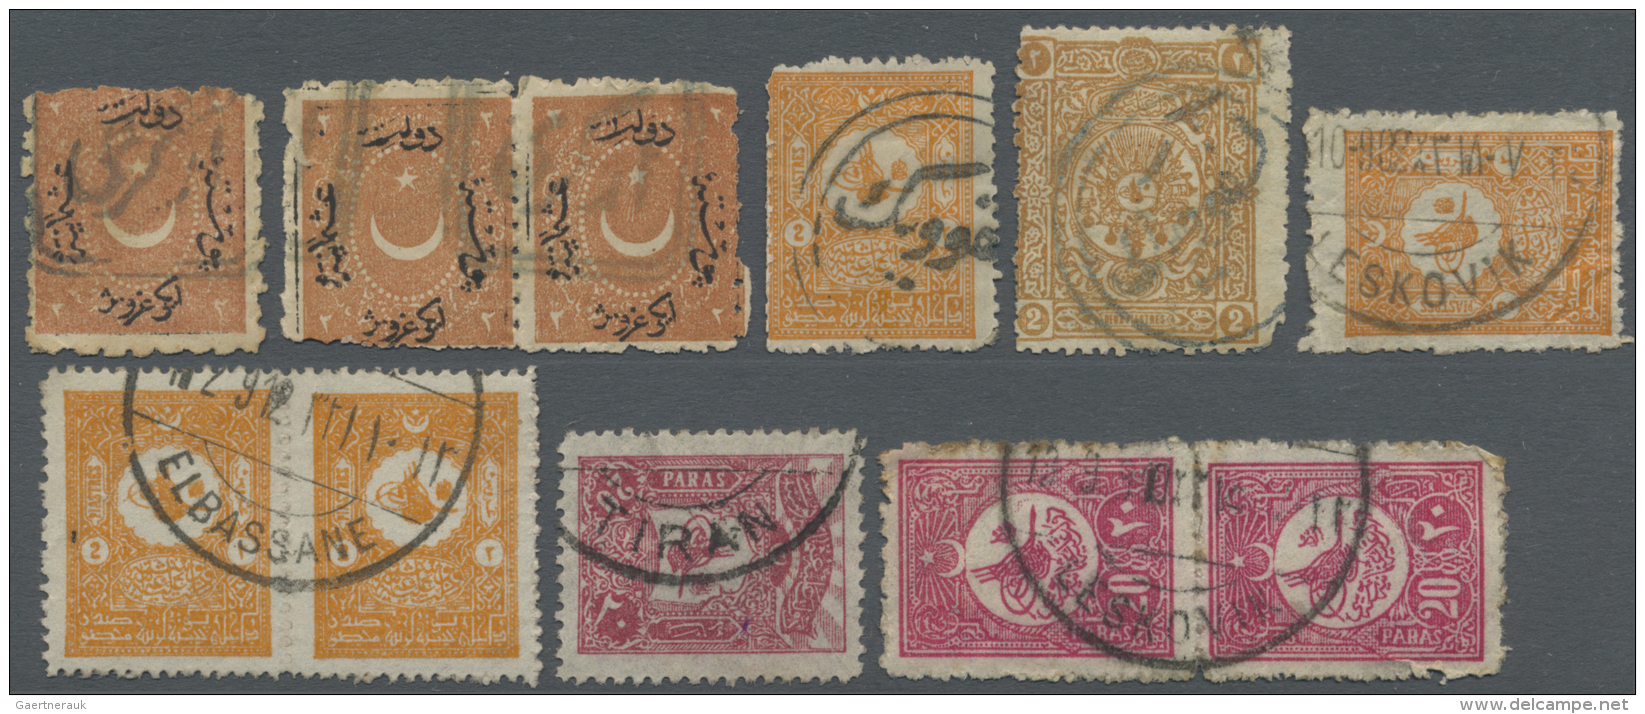 Albanien - Stempel: 1870-1910, Collection Of Ottoman Turkey Cancellations From ALBANIA On Stamps, Rare Small Towns Inclu - Albania